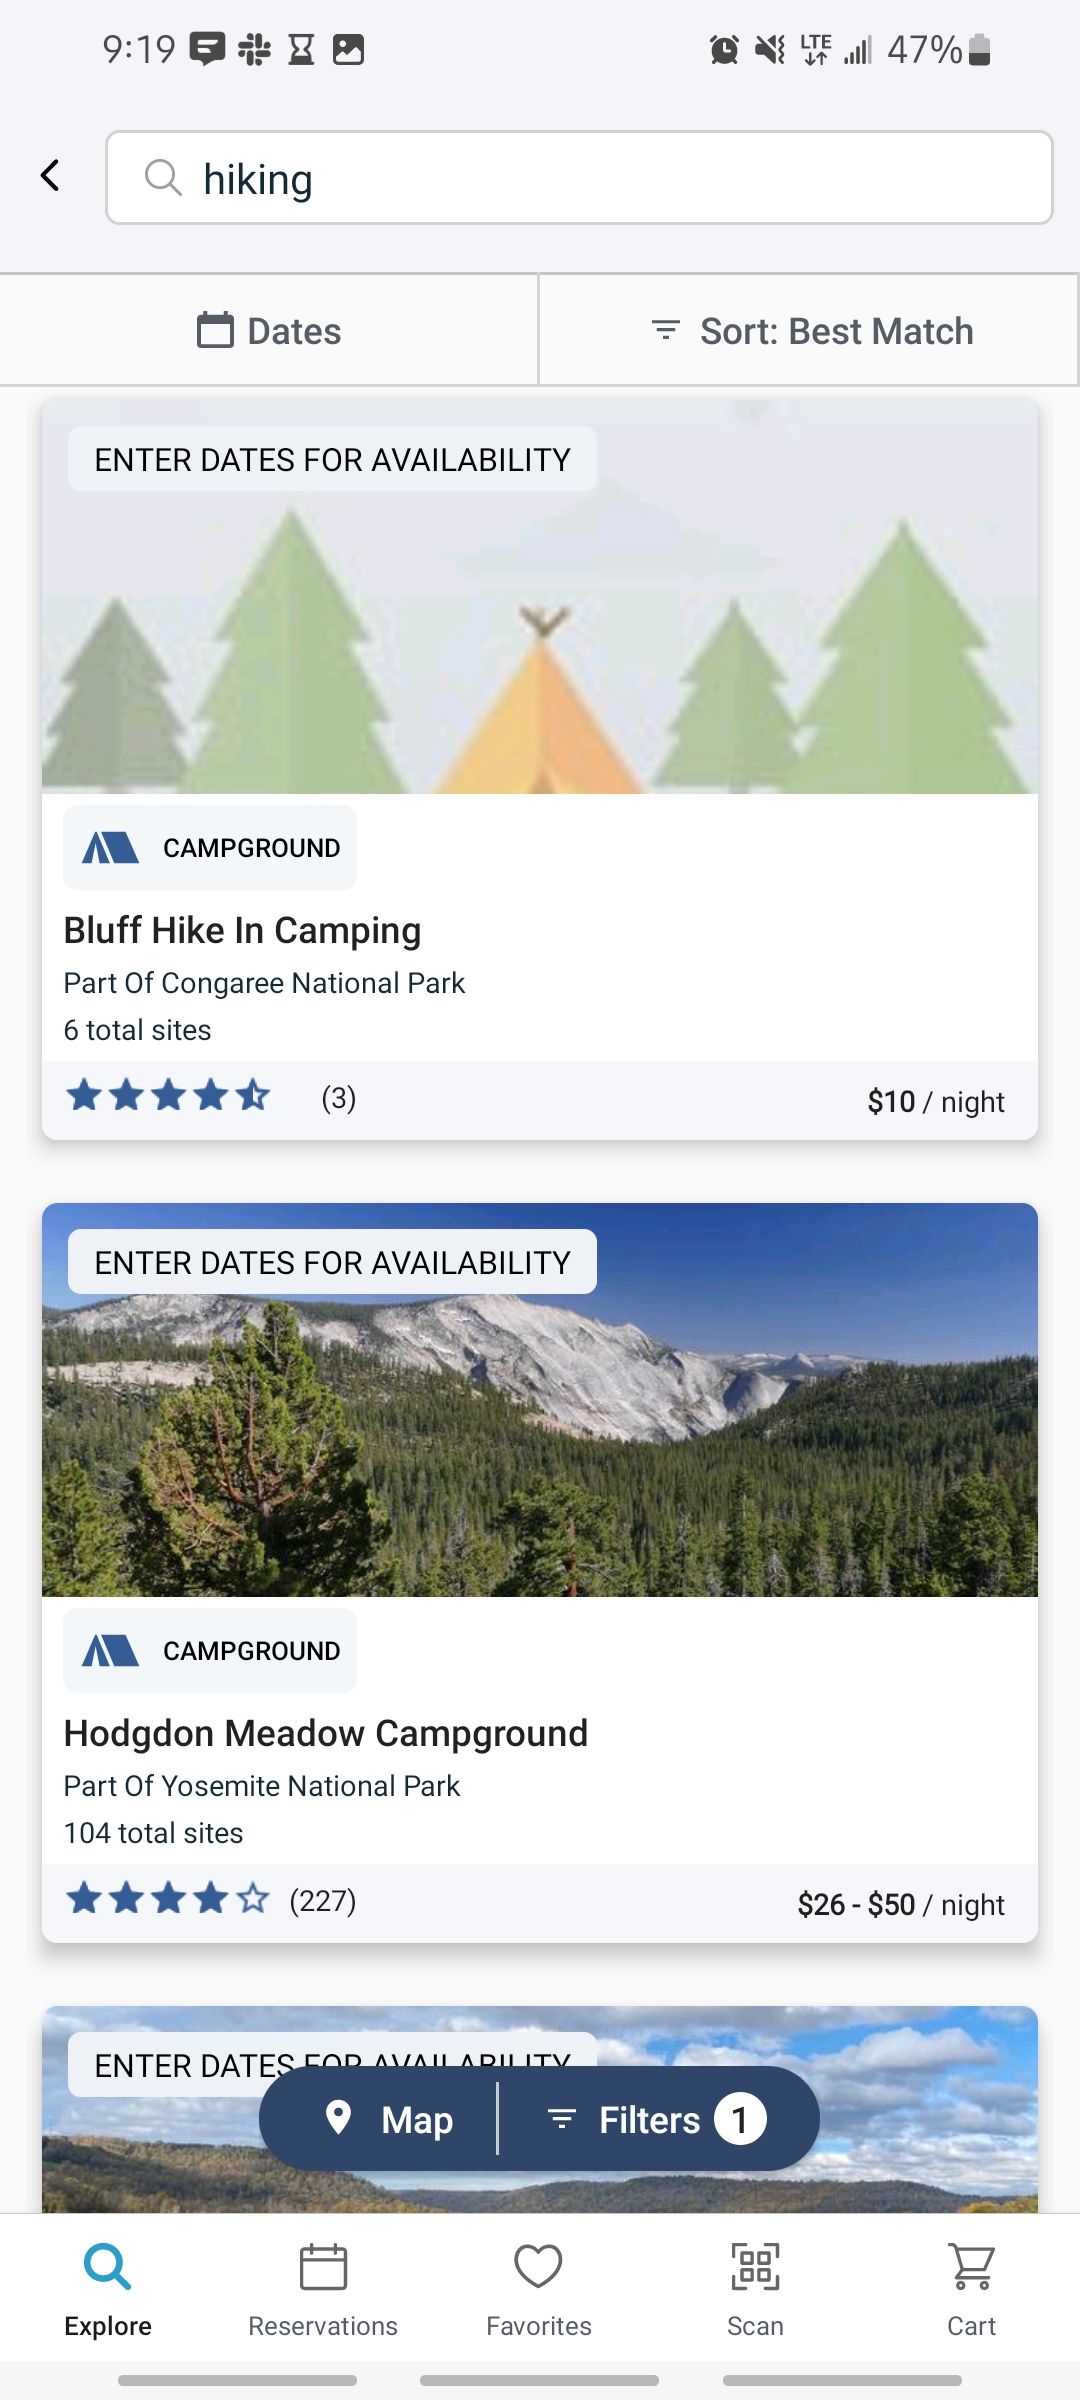 Screenshot of hiking search in the Recreationgov app showing campground options